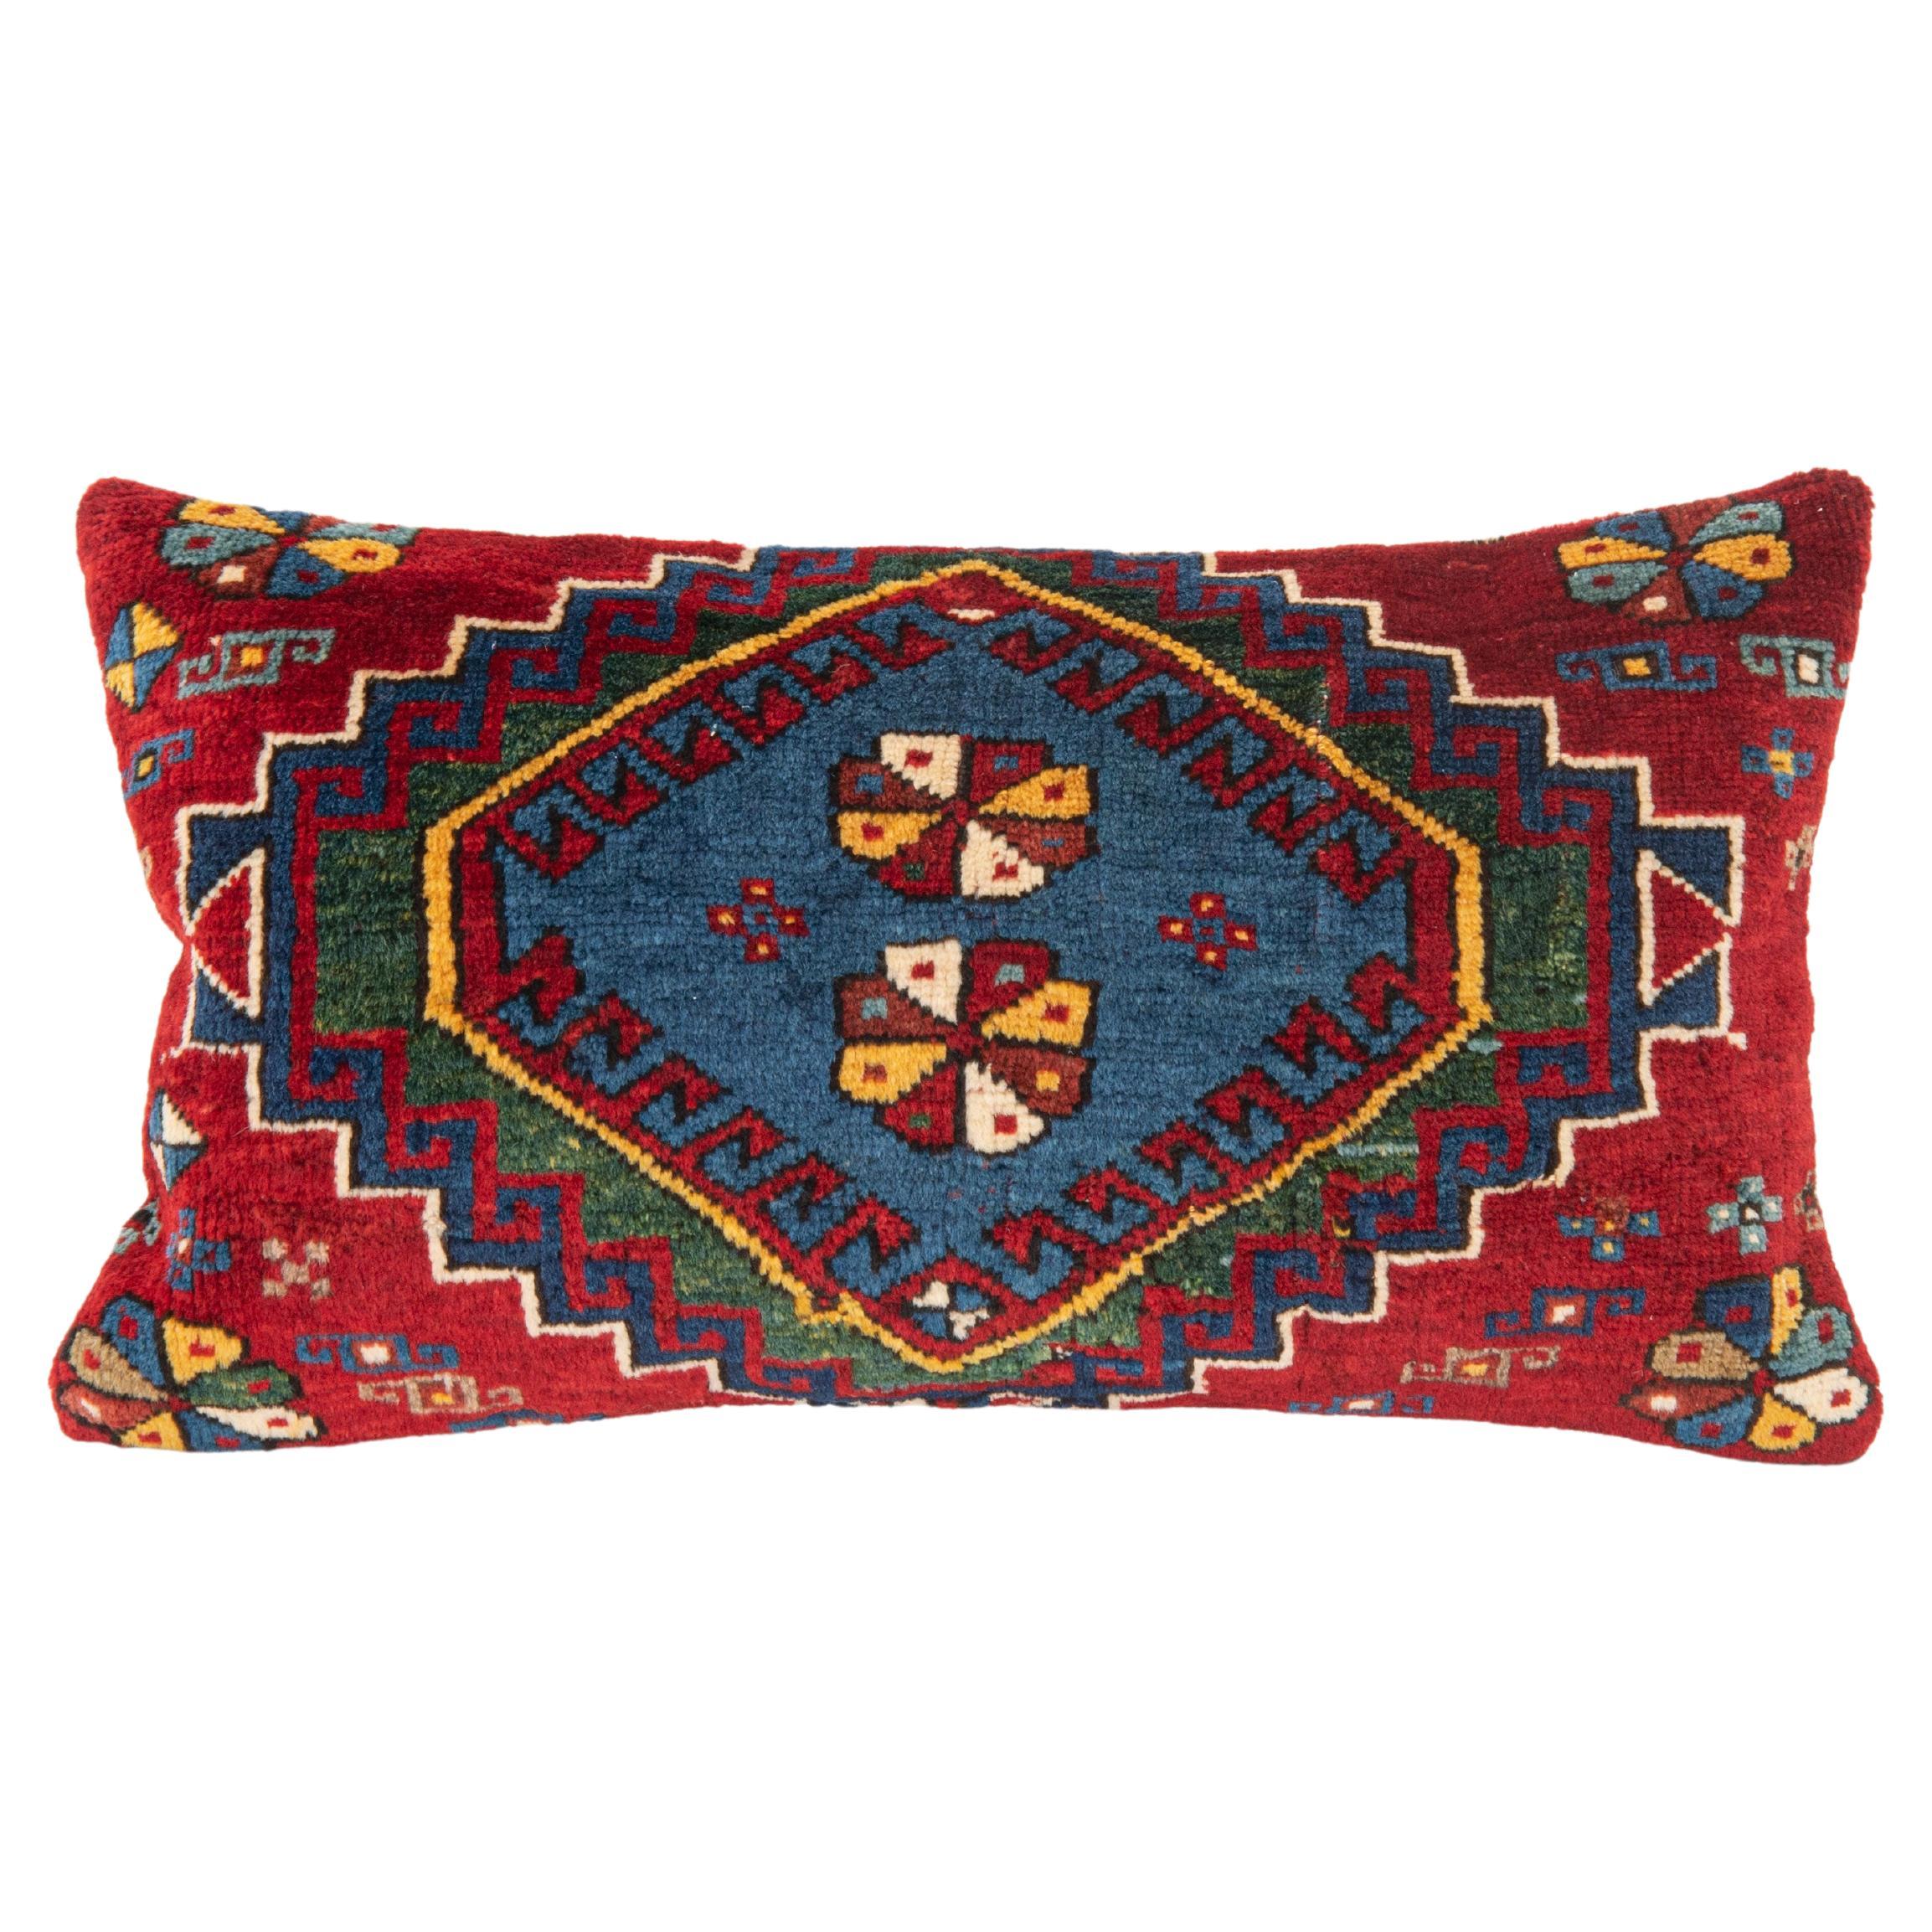 Pillow Cover. Made from a Caucasian Rug, late 19th C.